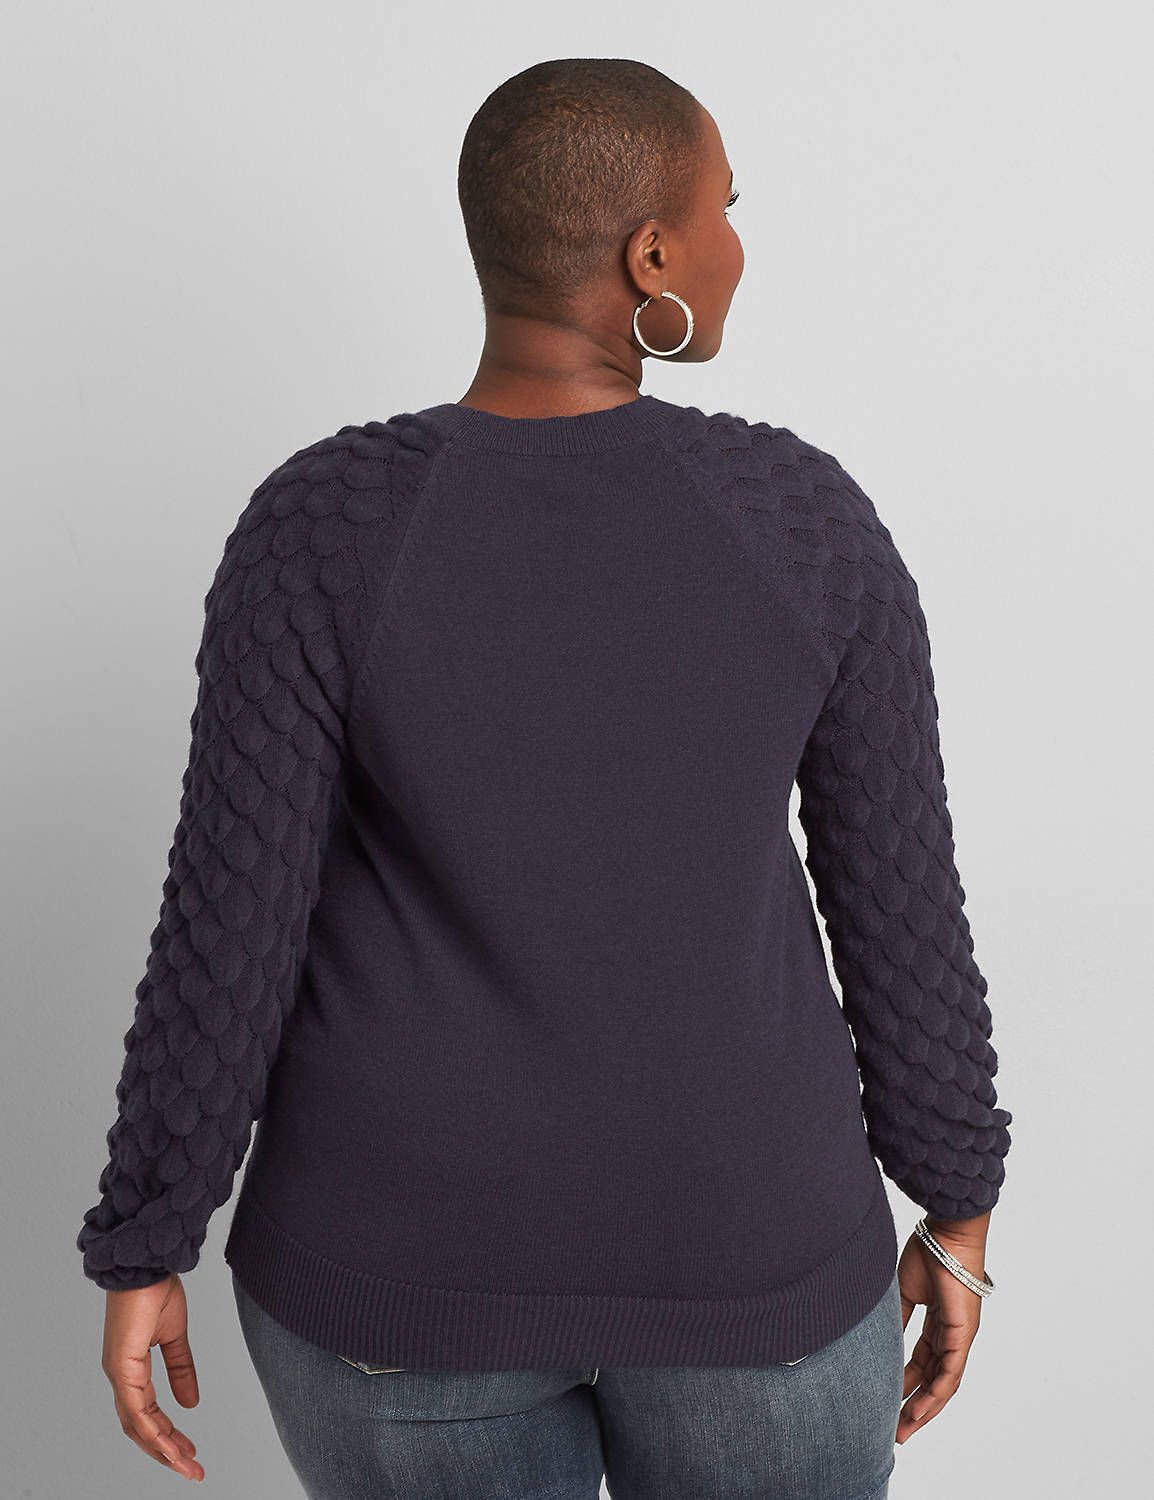 Long Sleeve Crew Neck Sweater with Geo Pointelle Sleeves 1116073:PANTONE Night Sky:14/16 Product Image 2